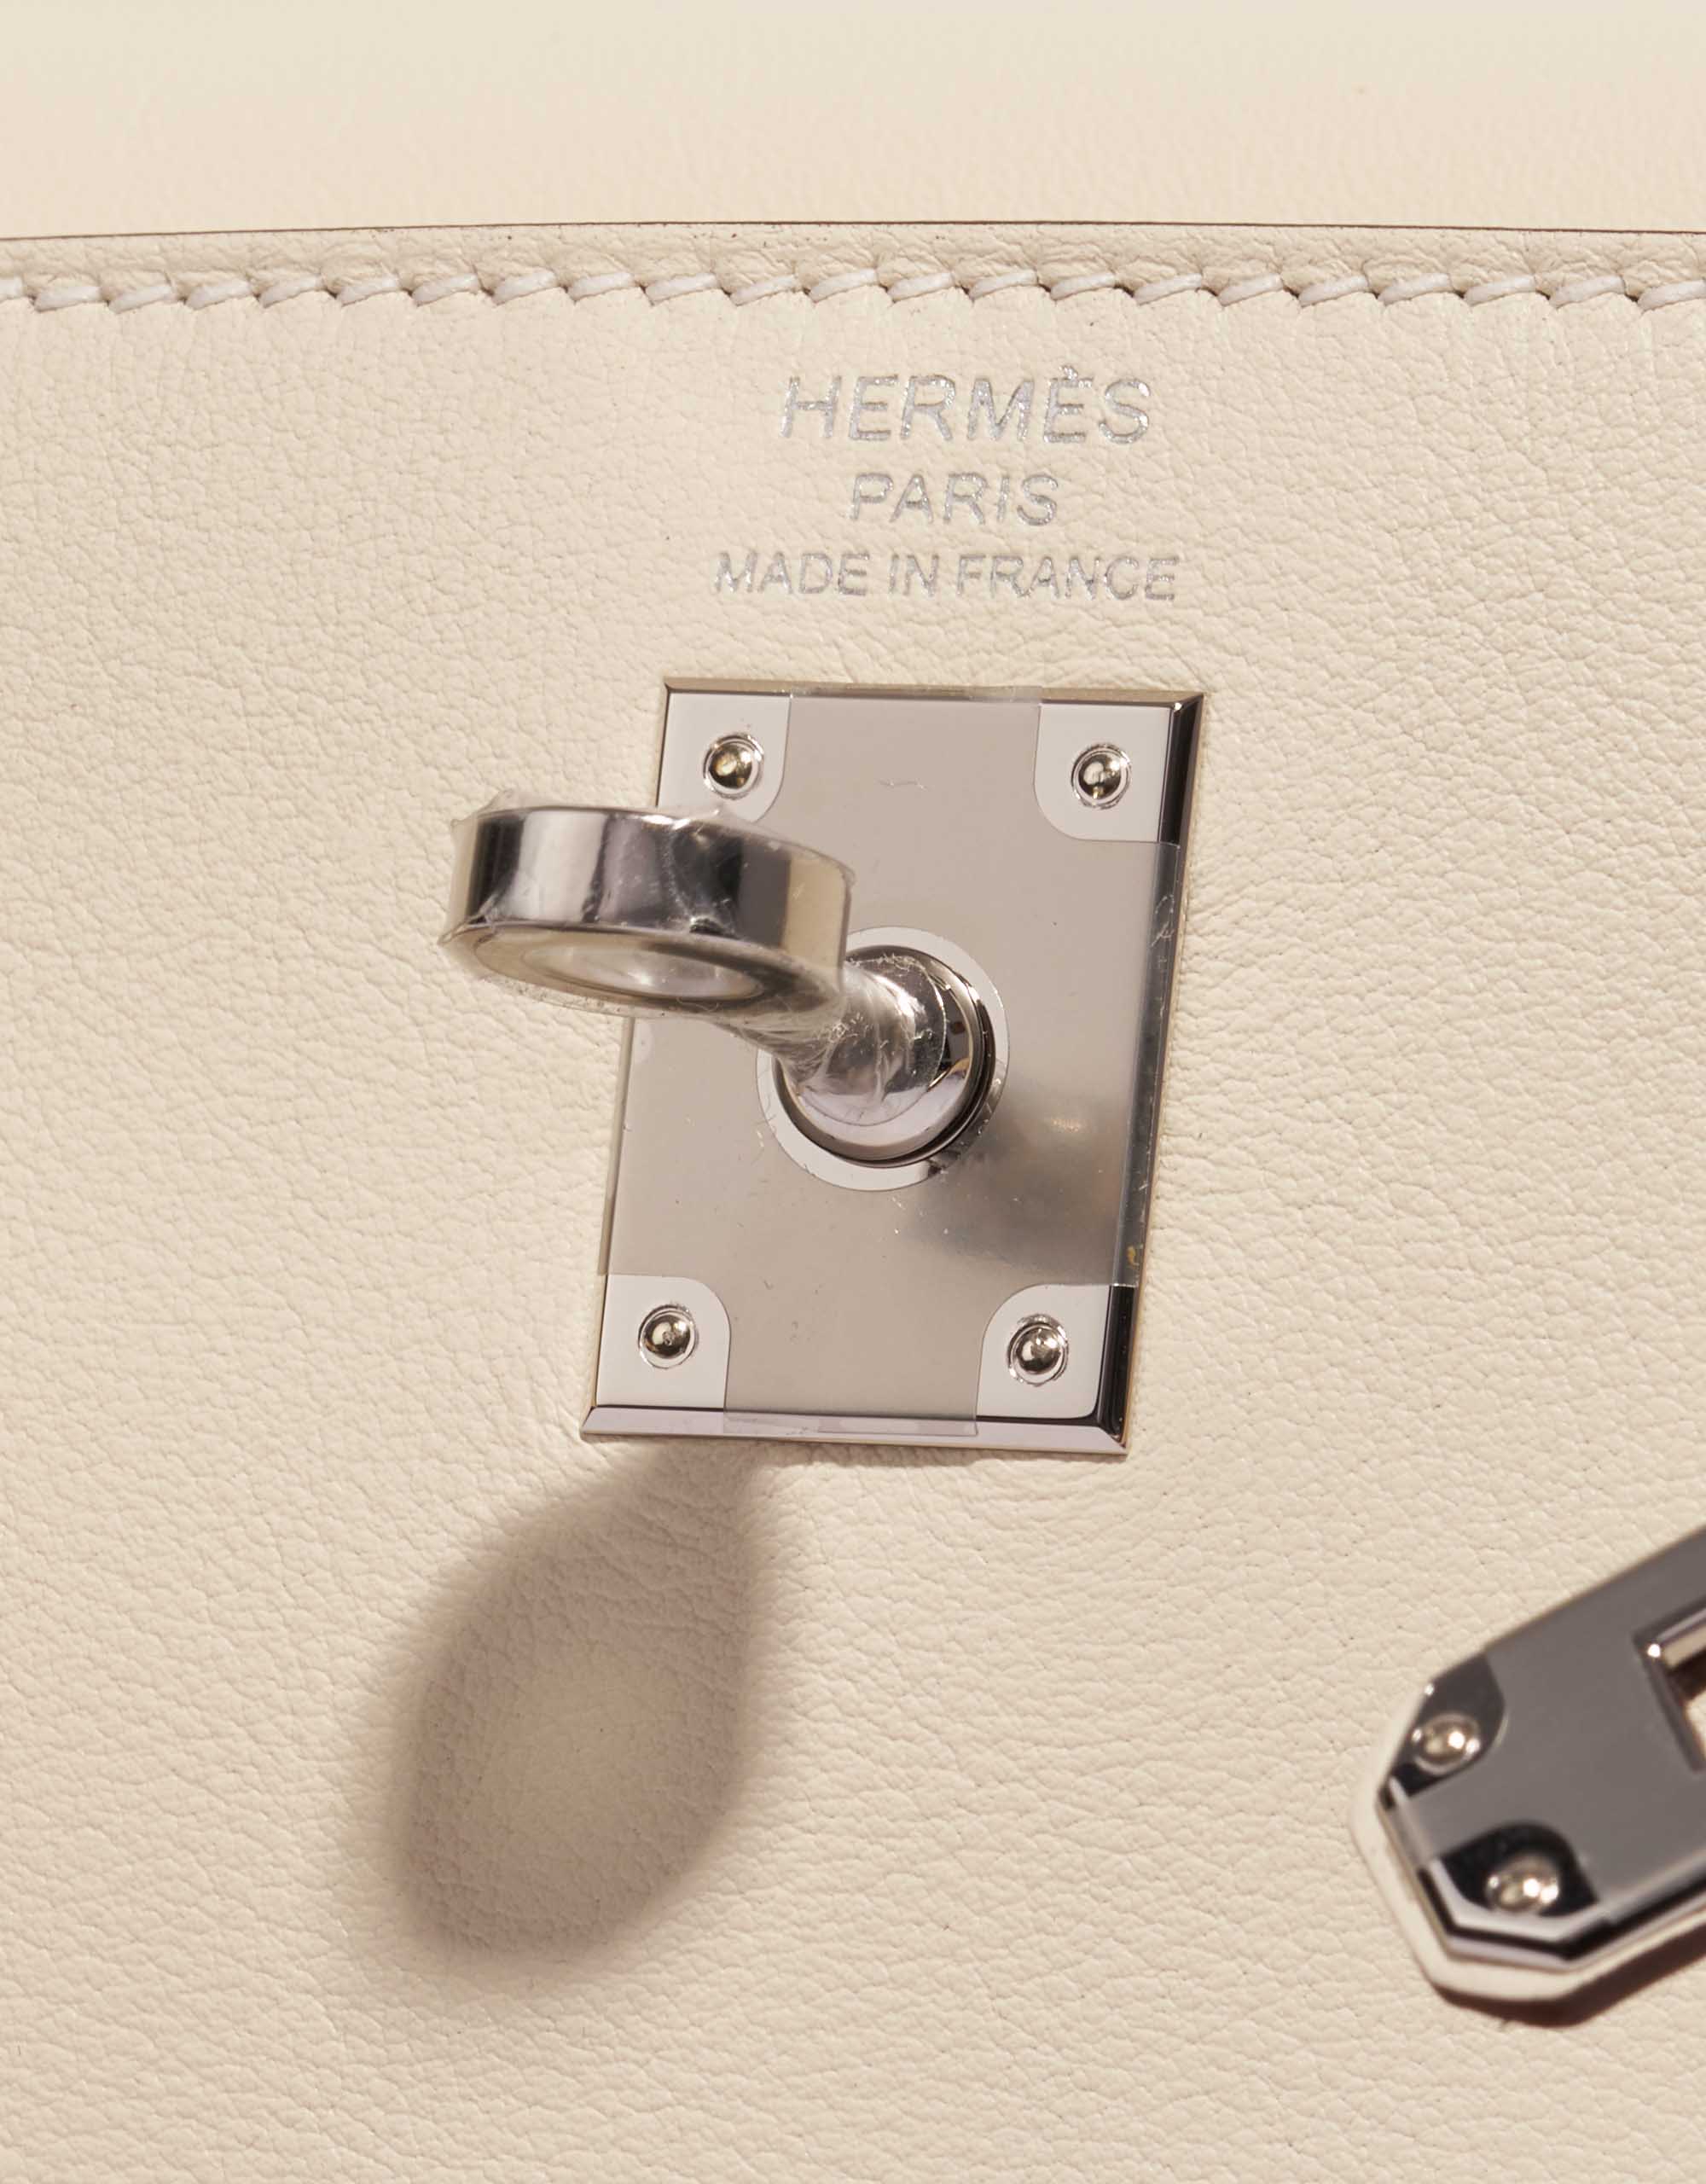 Hermès Nata Swift in and Out Kelly